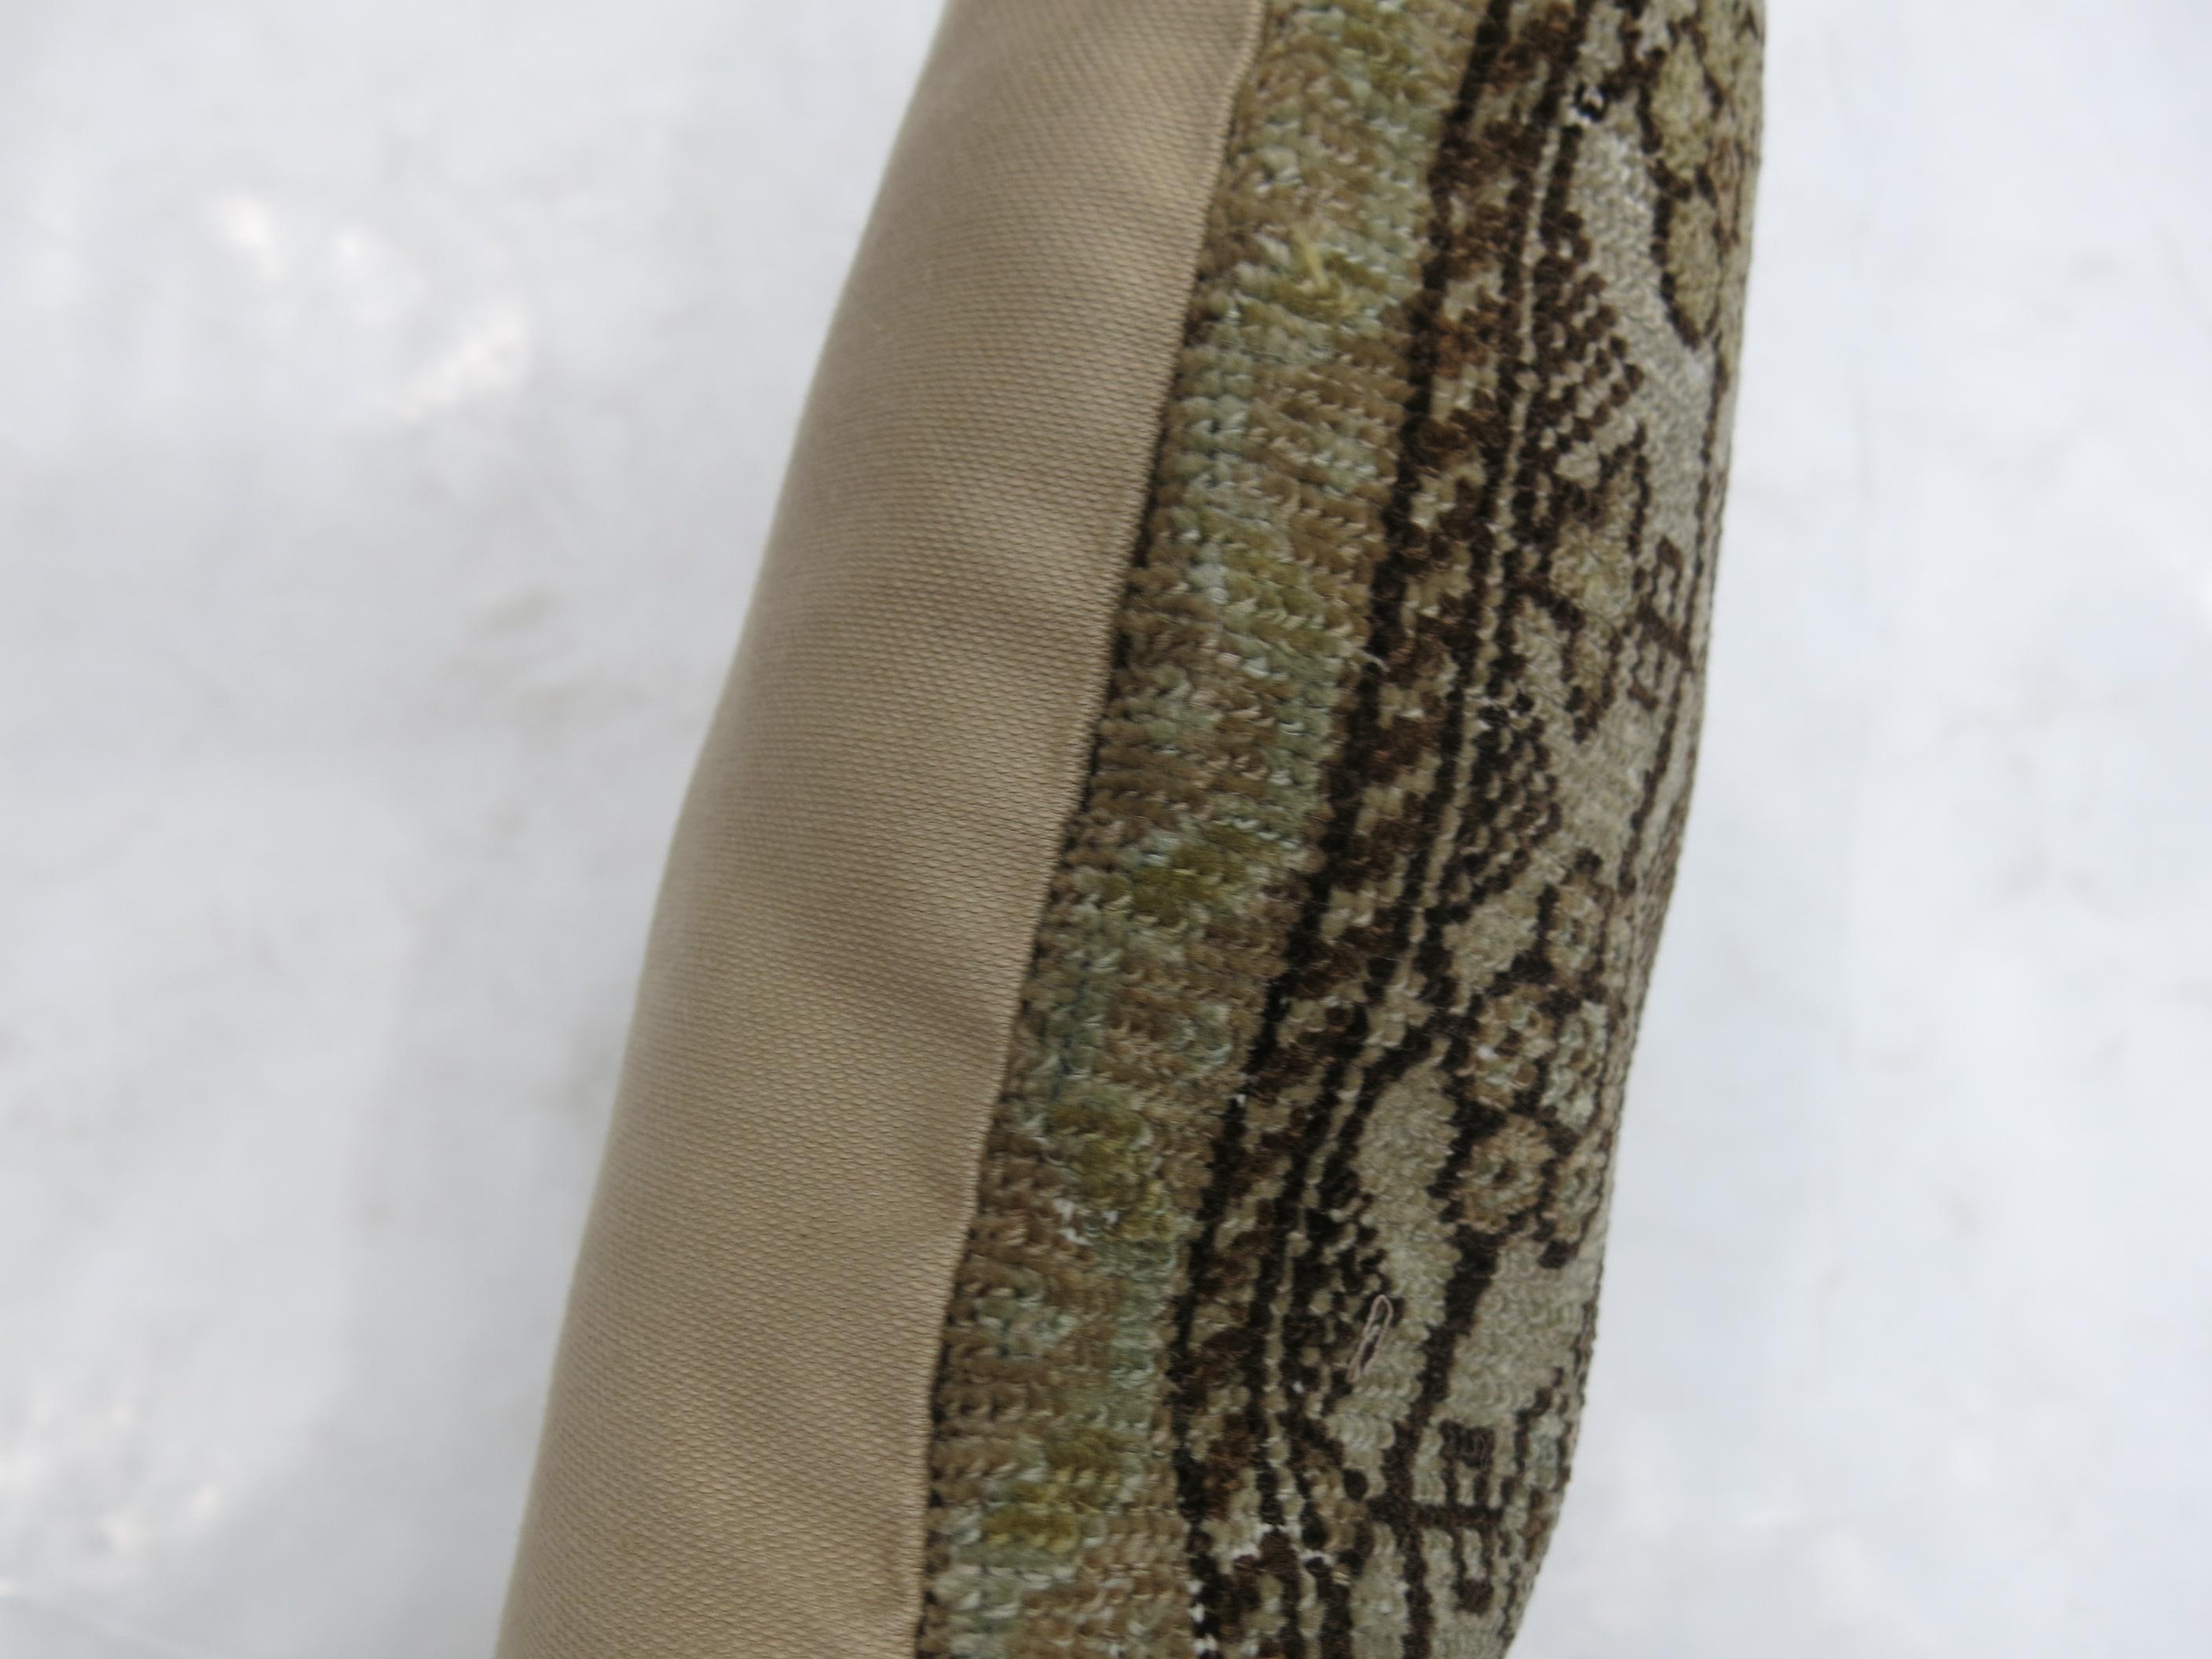 Pillow made from an antique Persian Malayer rug in browns and green.

16'' x 16''